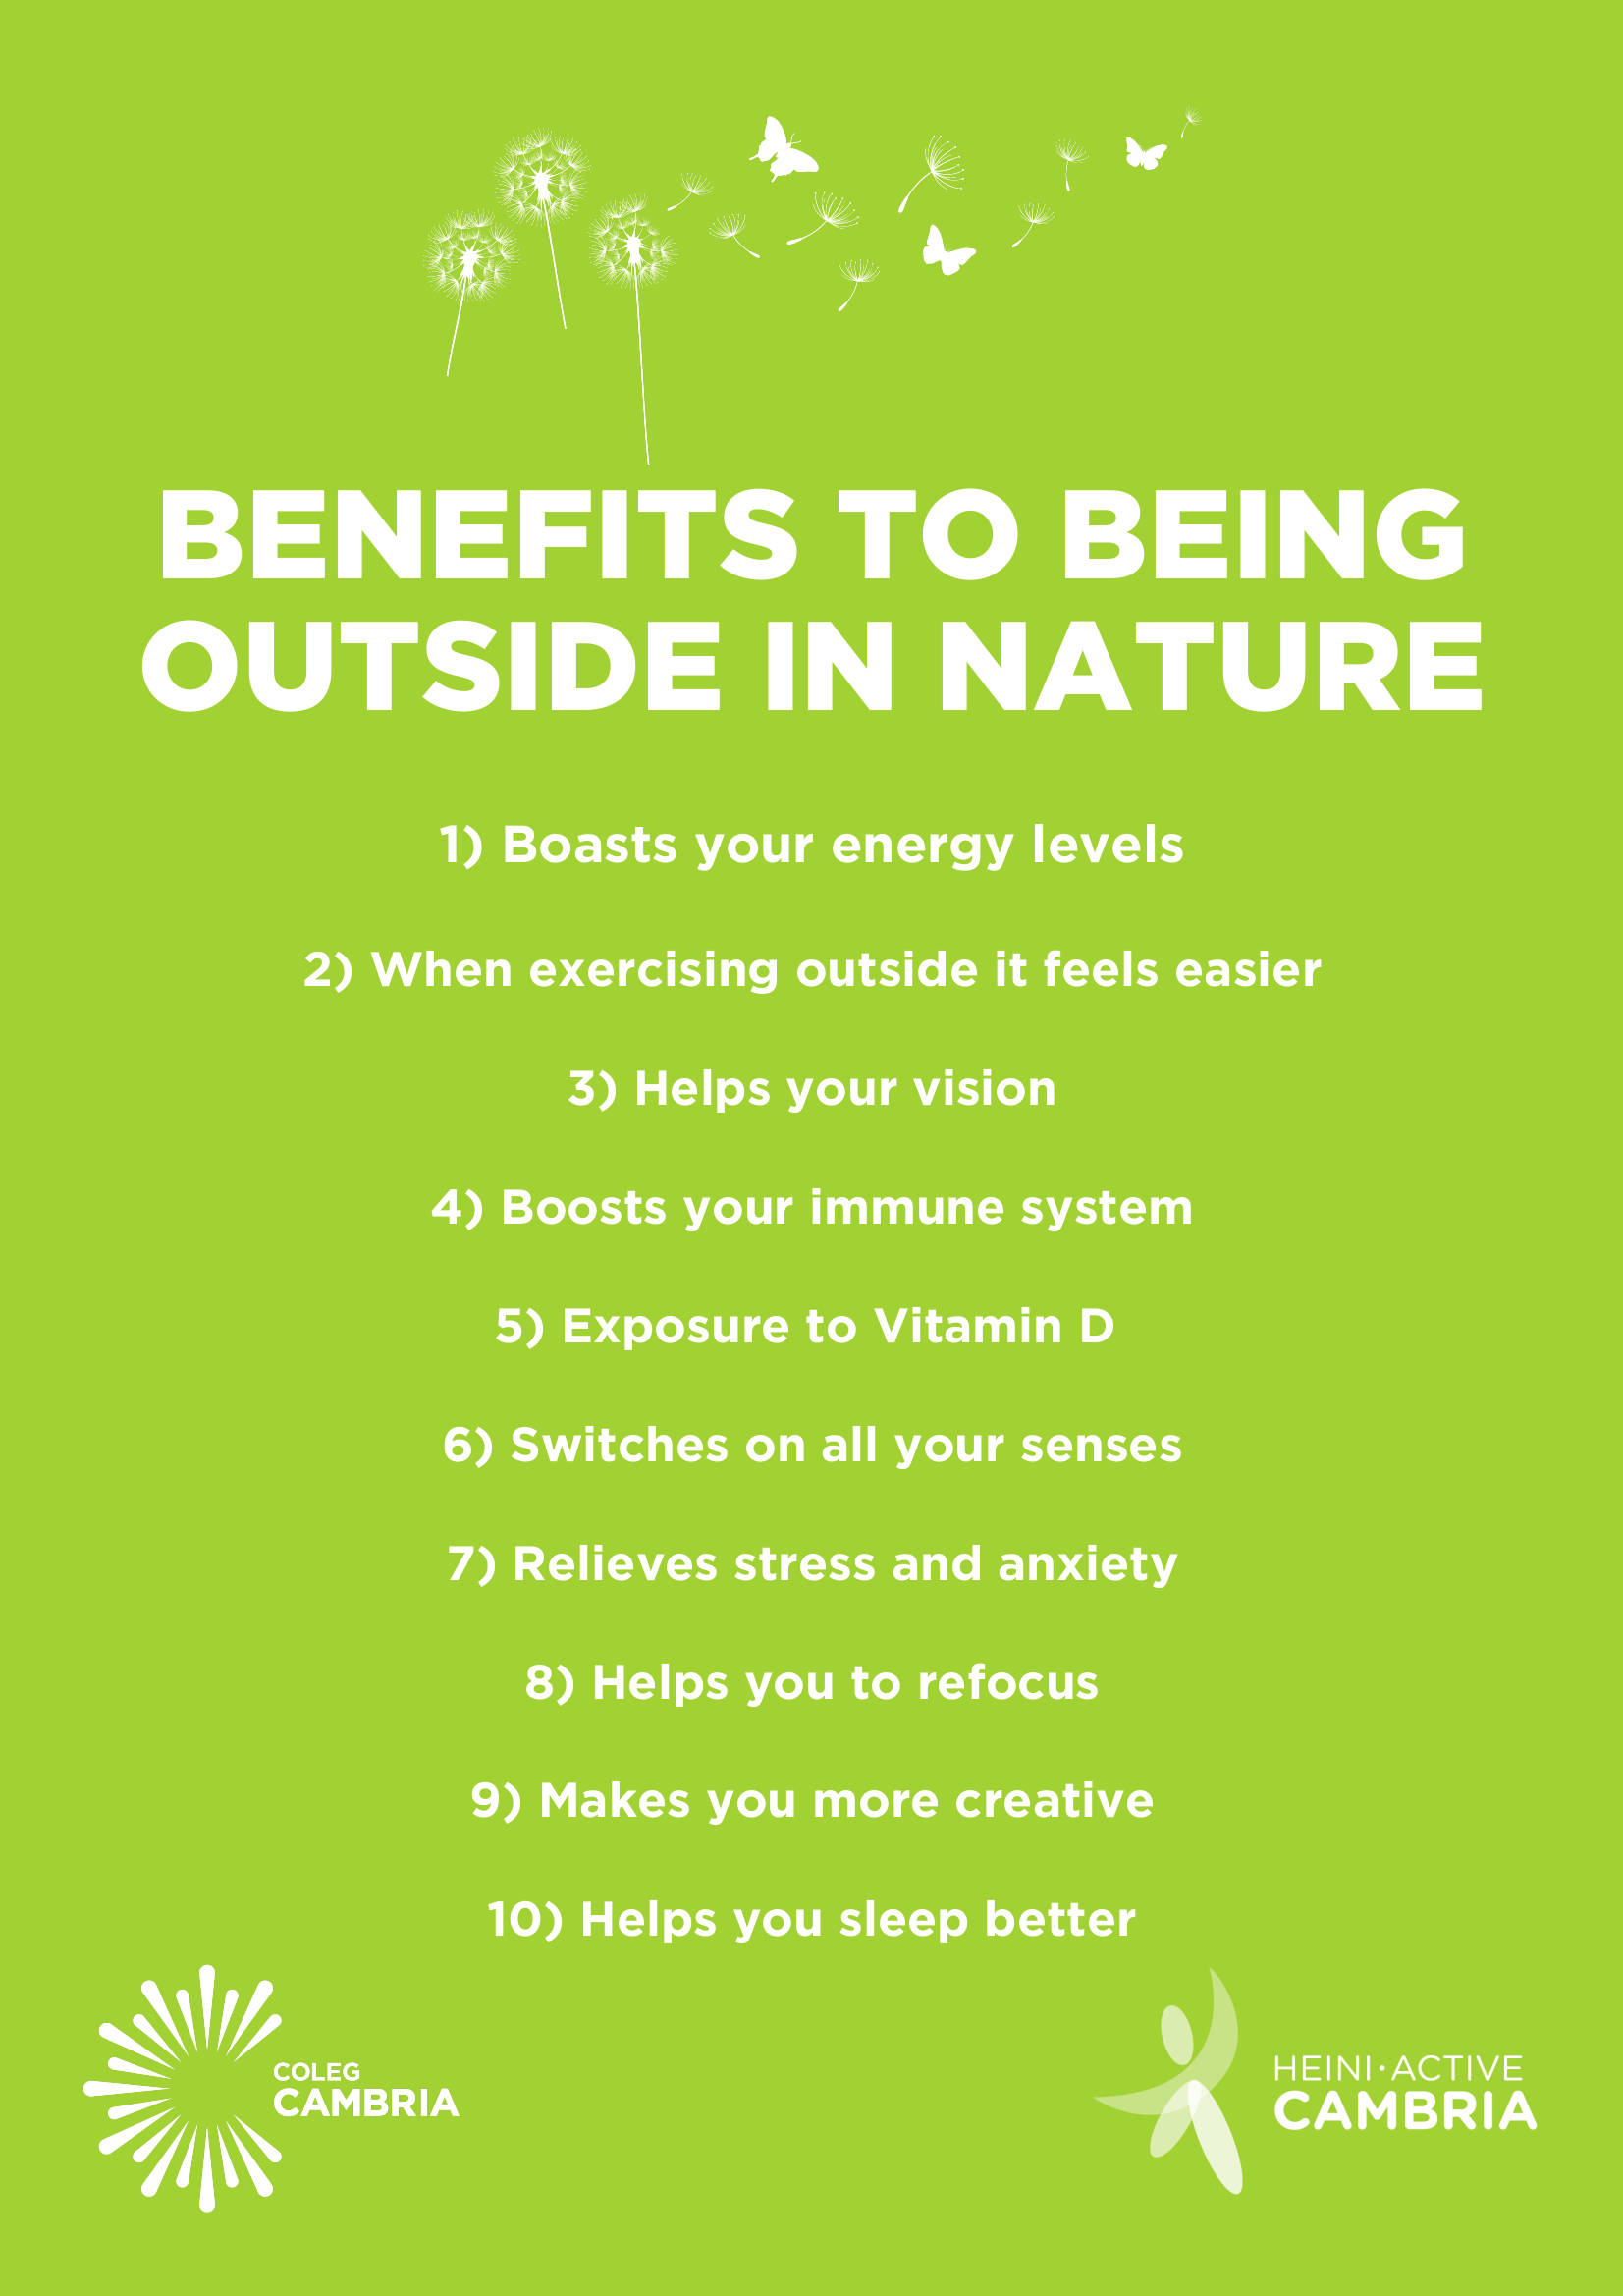 Benefits to being outside in nature